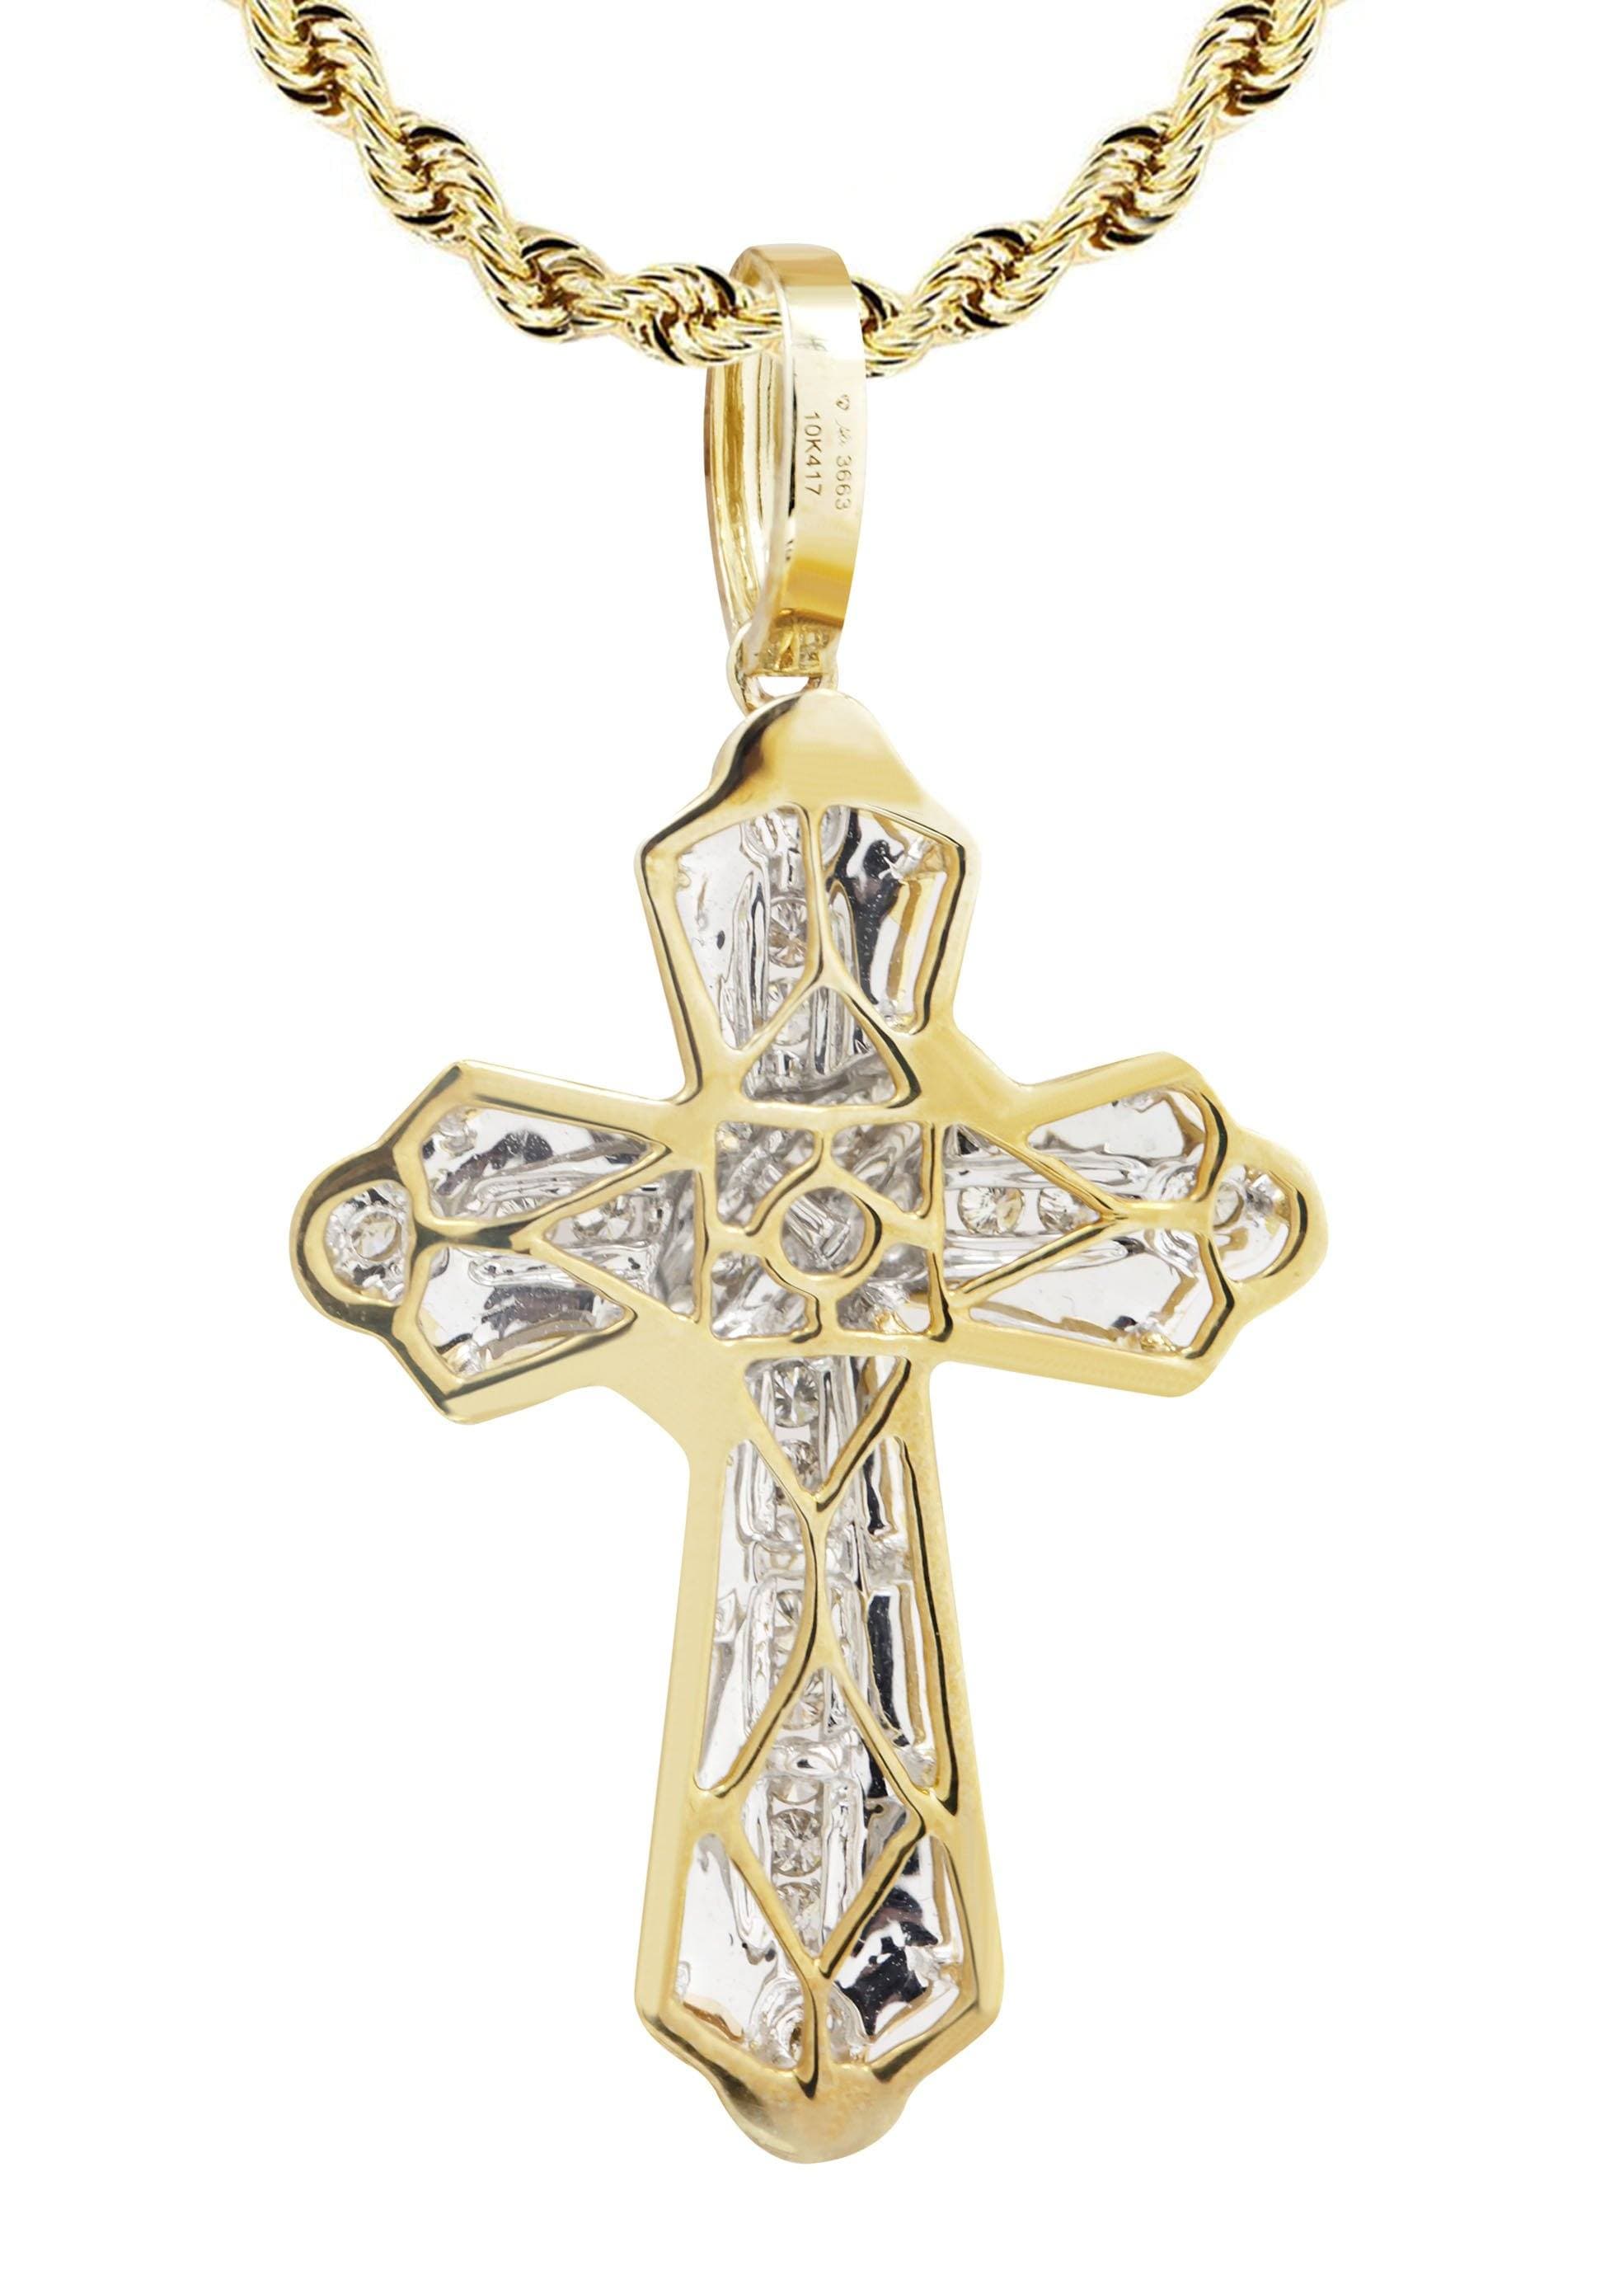 10K Yellow Gold Cross Pendant & Rope Chain | 0.57 Carats – FrostNYC